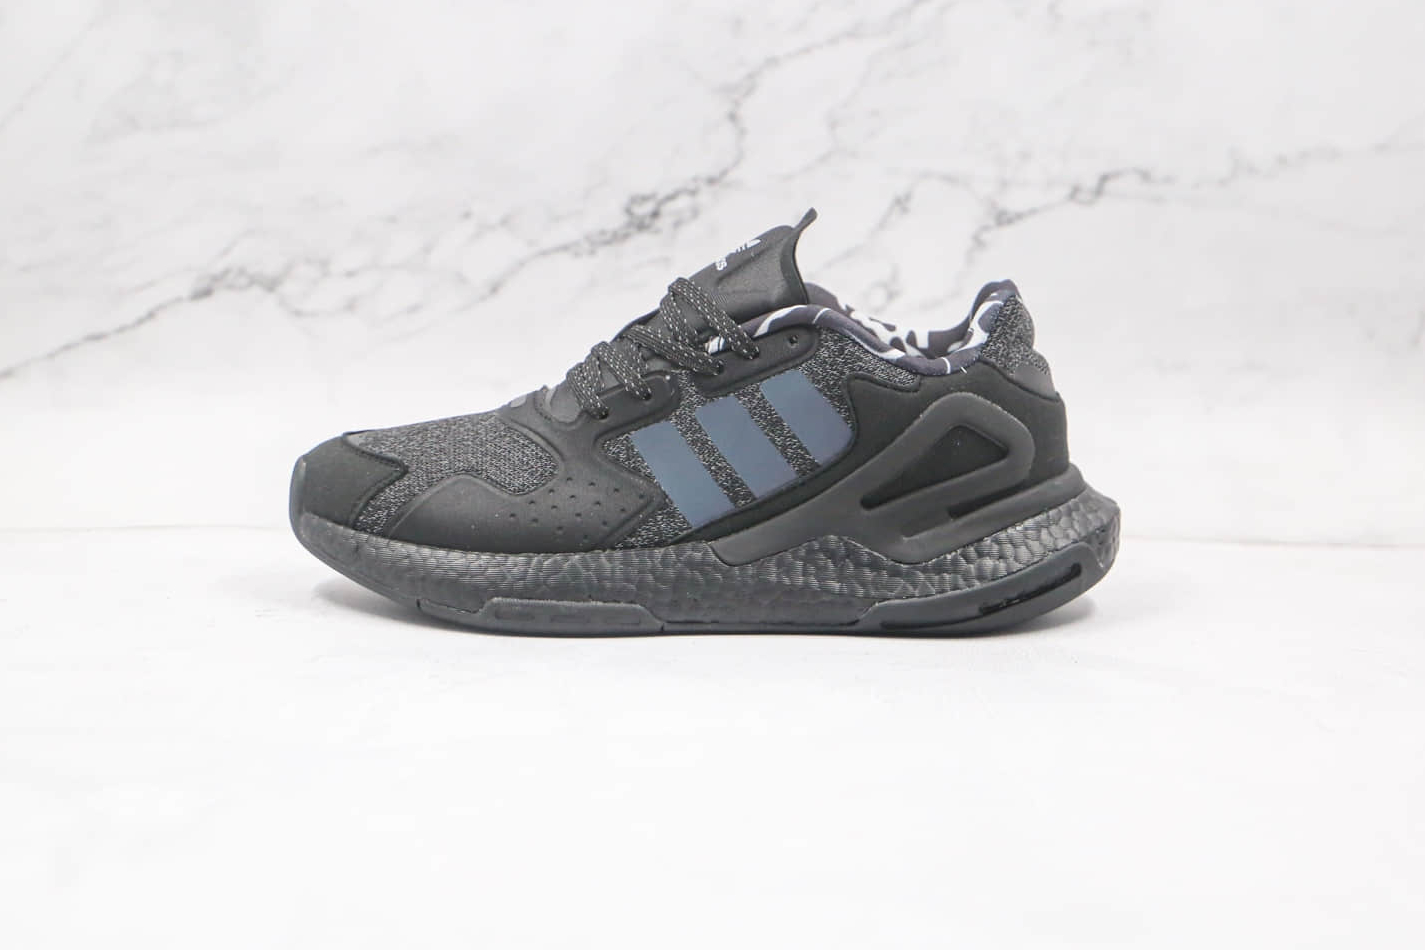 Adidas Day Jogger 2020 Boost Core Black Cloud White FW4830 - Stylish and Comfortable Sneakers